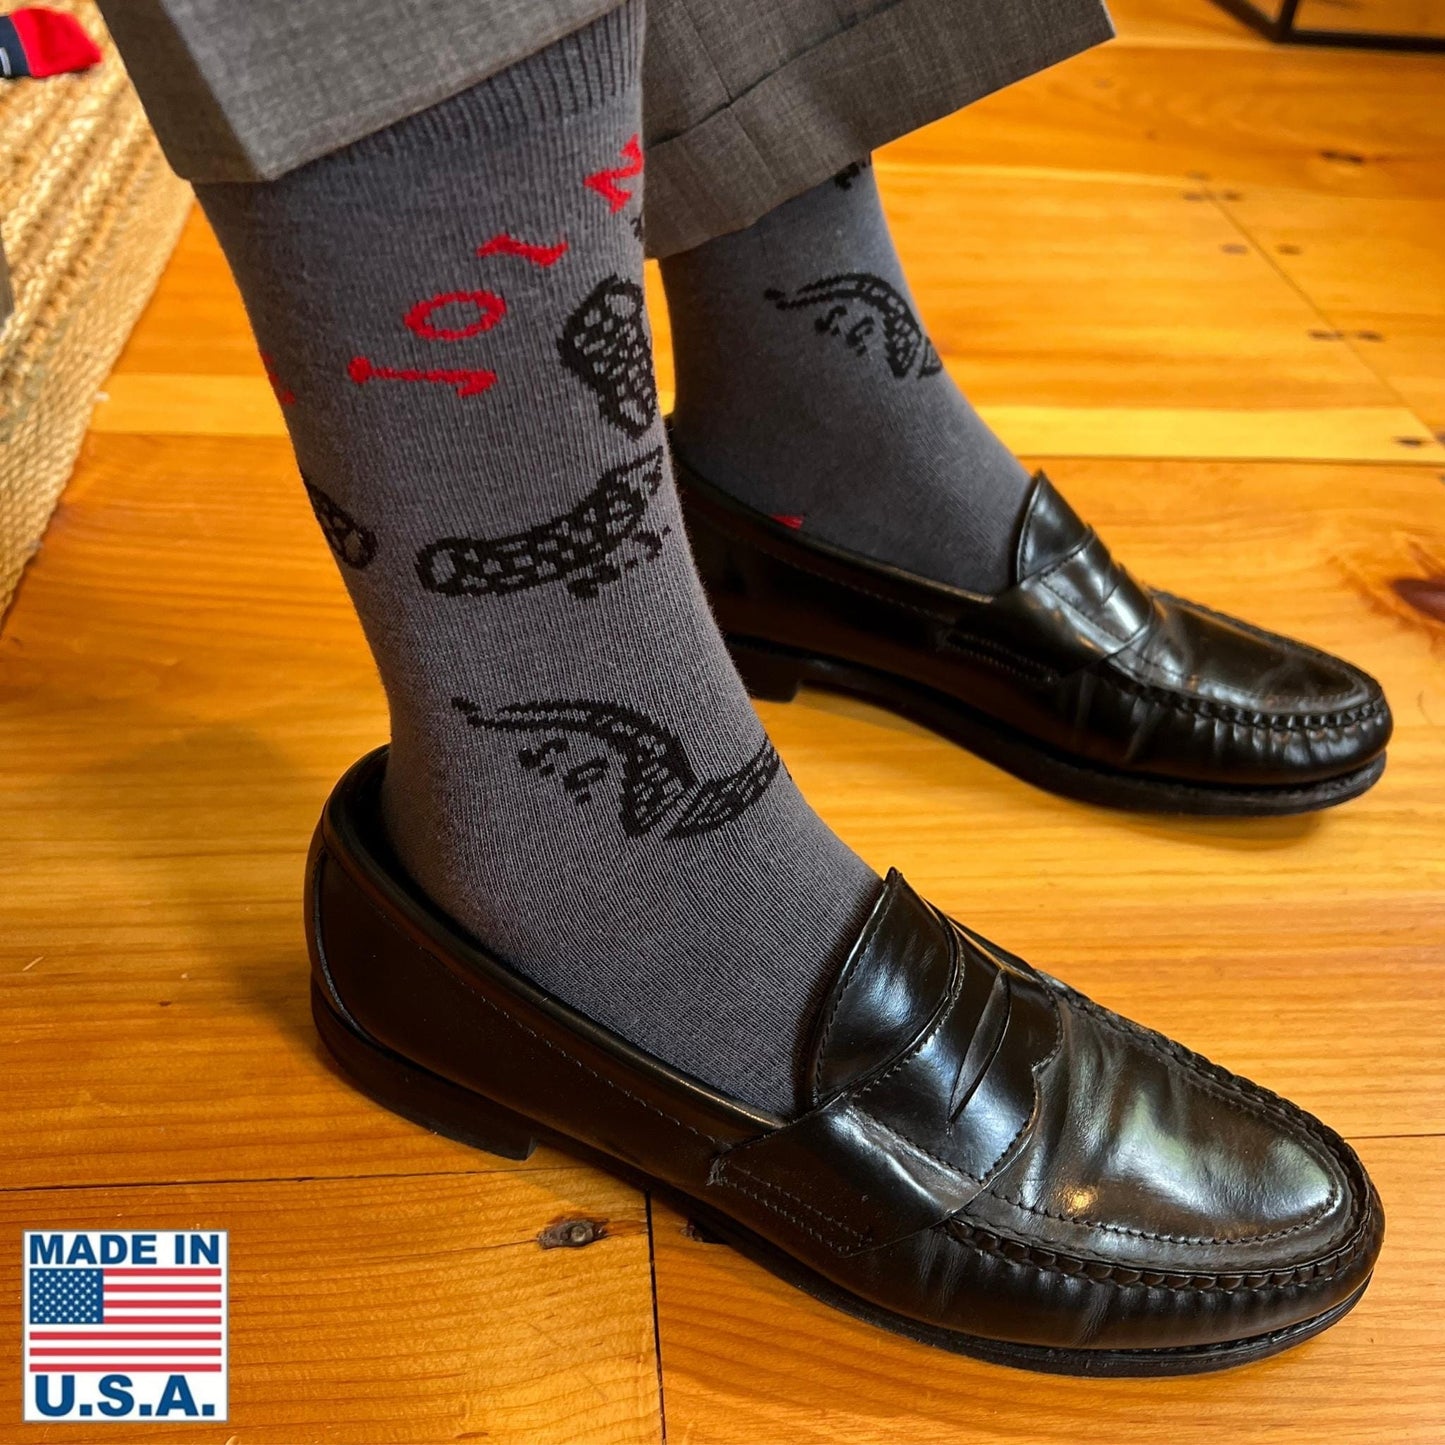 "Join or Die" Socks — Made in USA from The HIstory List store when worn with shoes